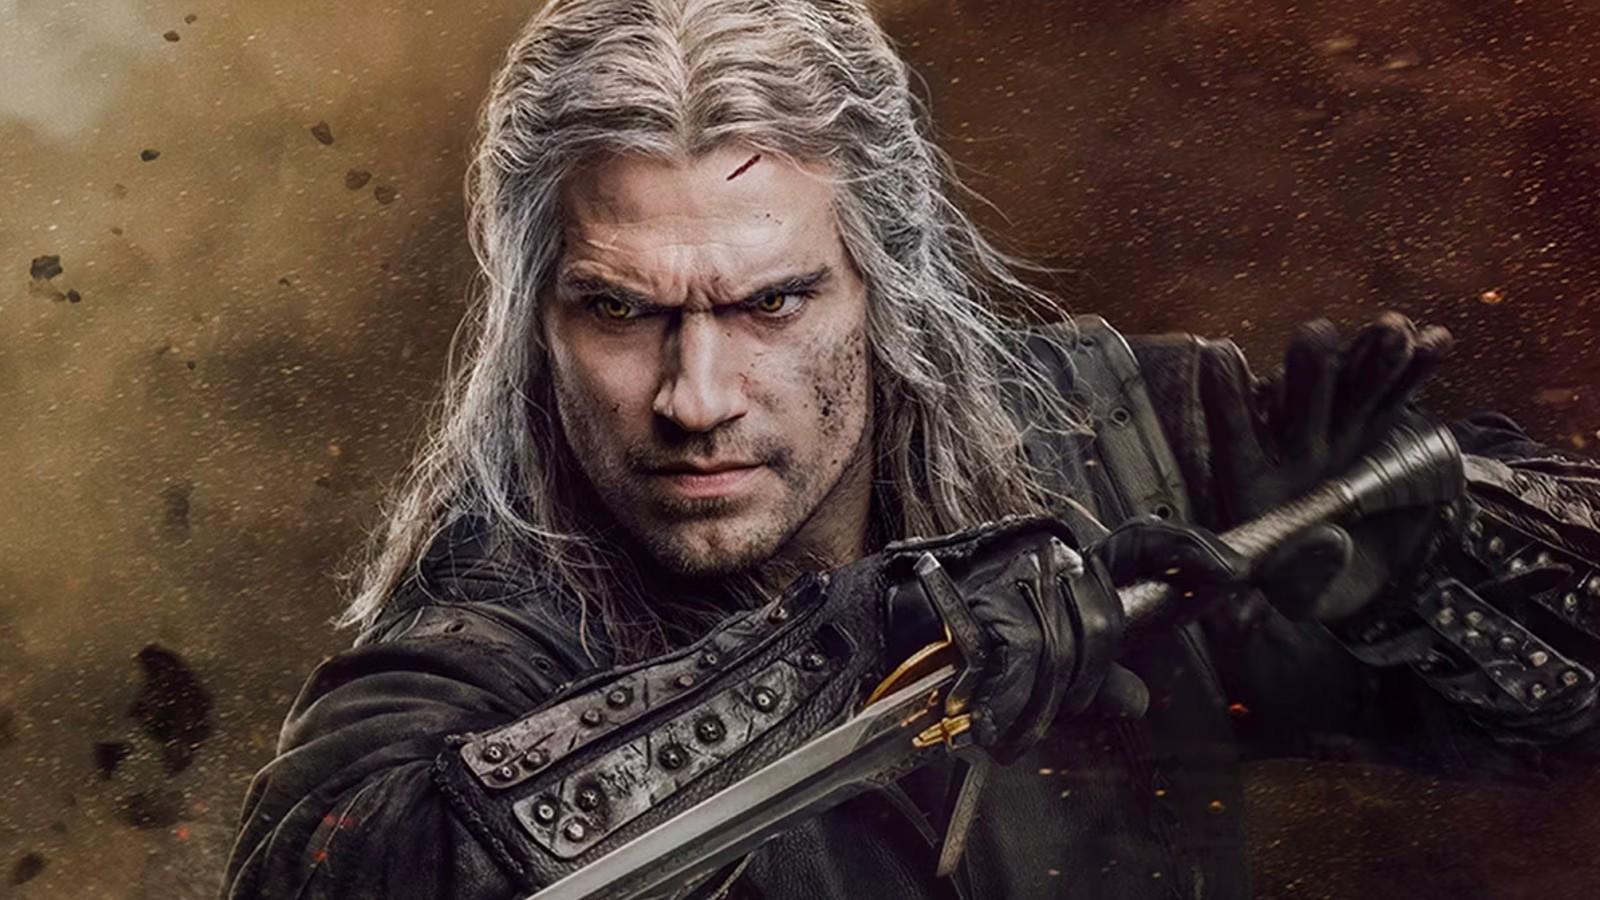 Henry Cavill as Geralt of Rivia in The Witcher Season 3 Volume 1 on Netflix